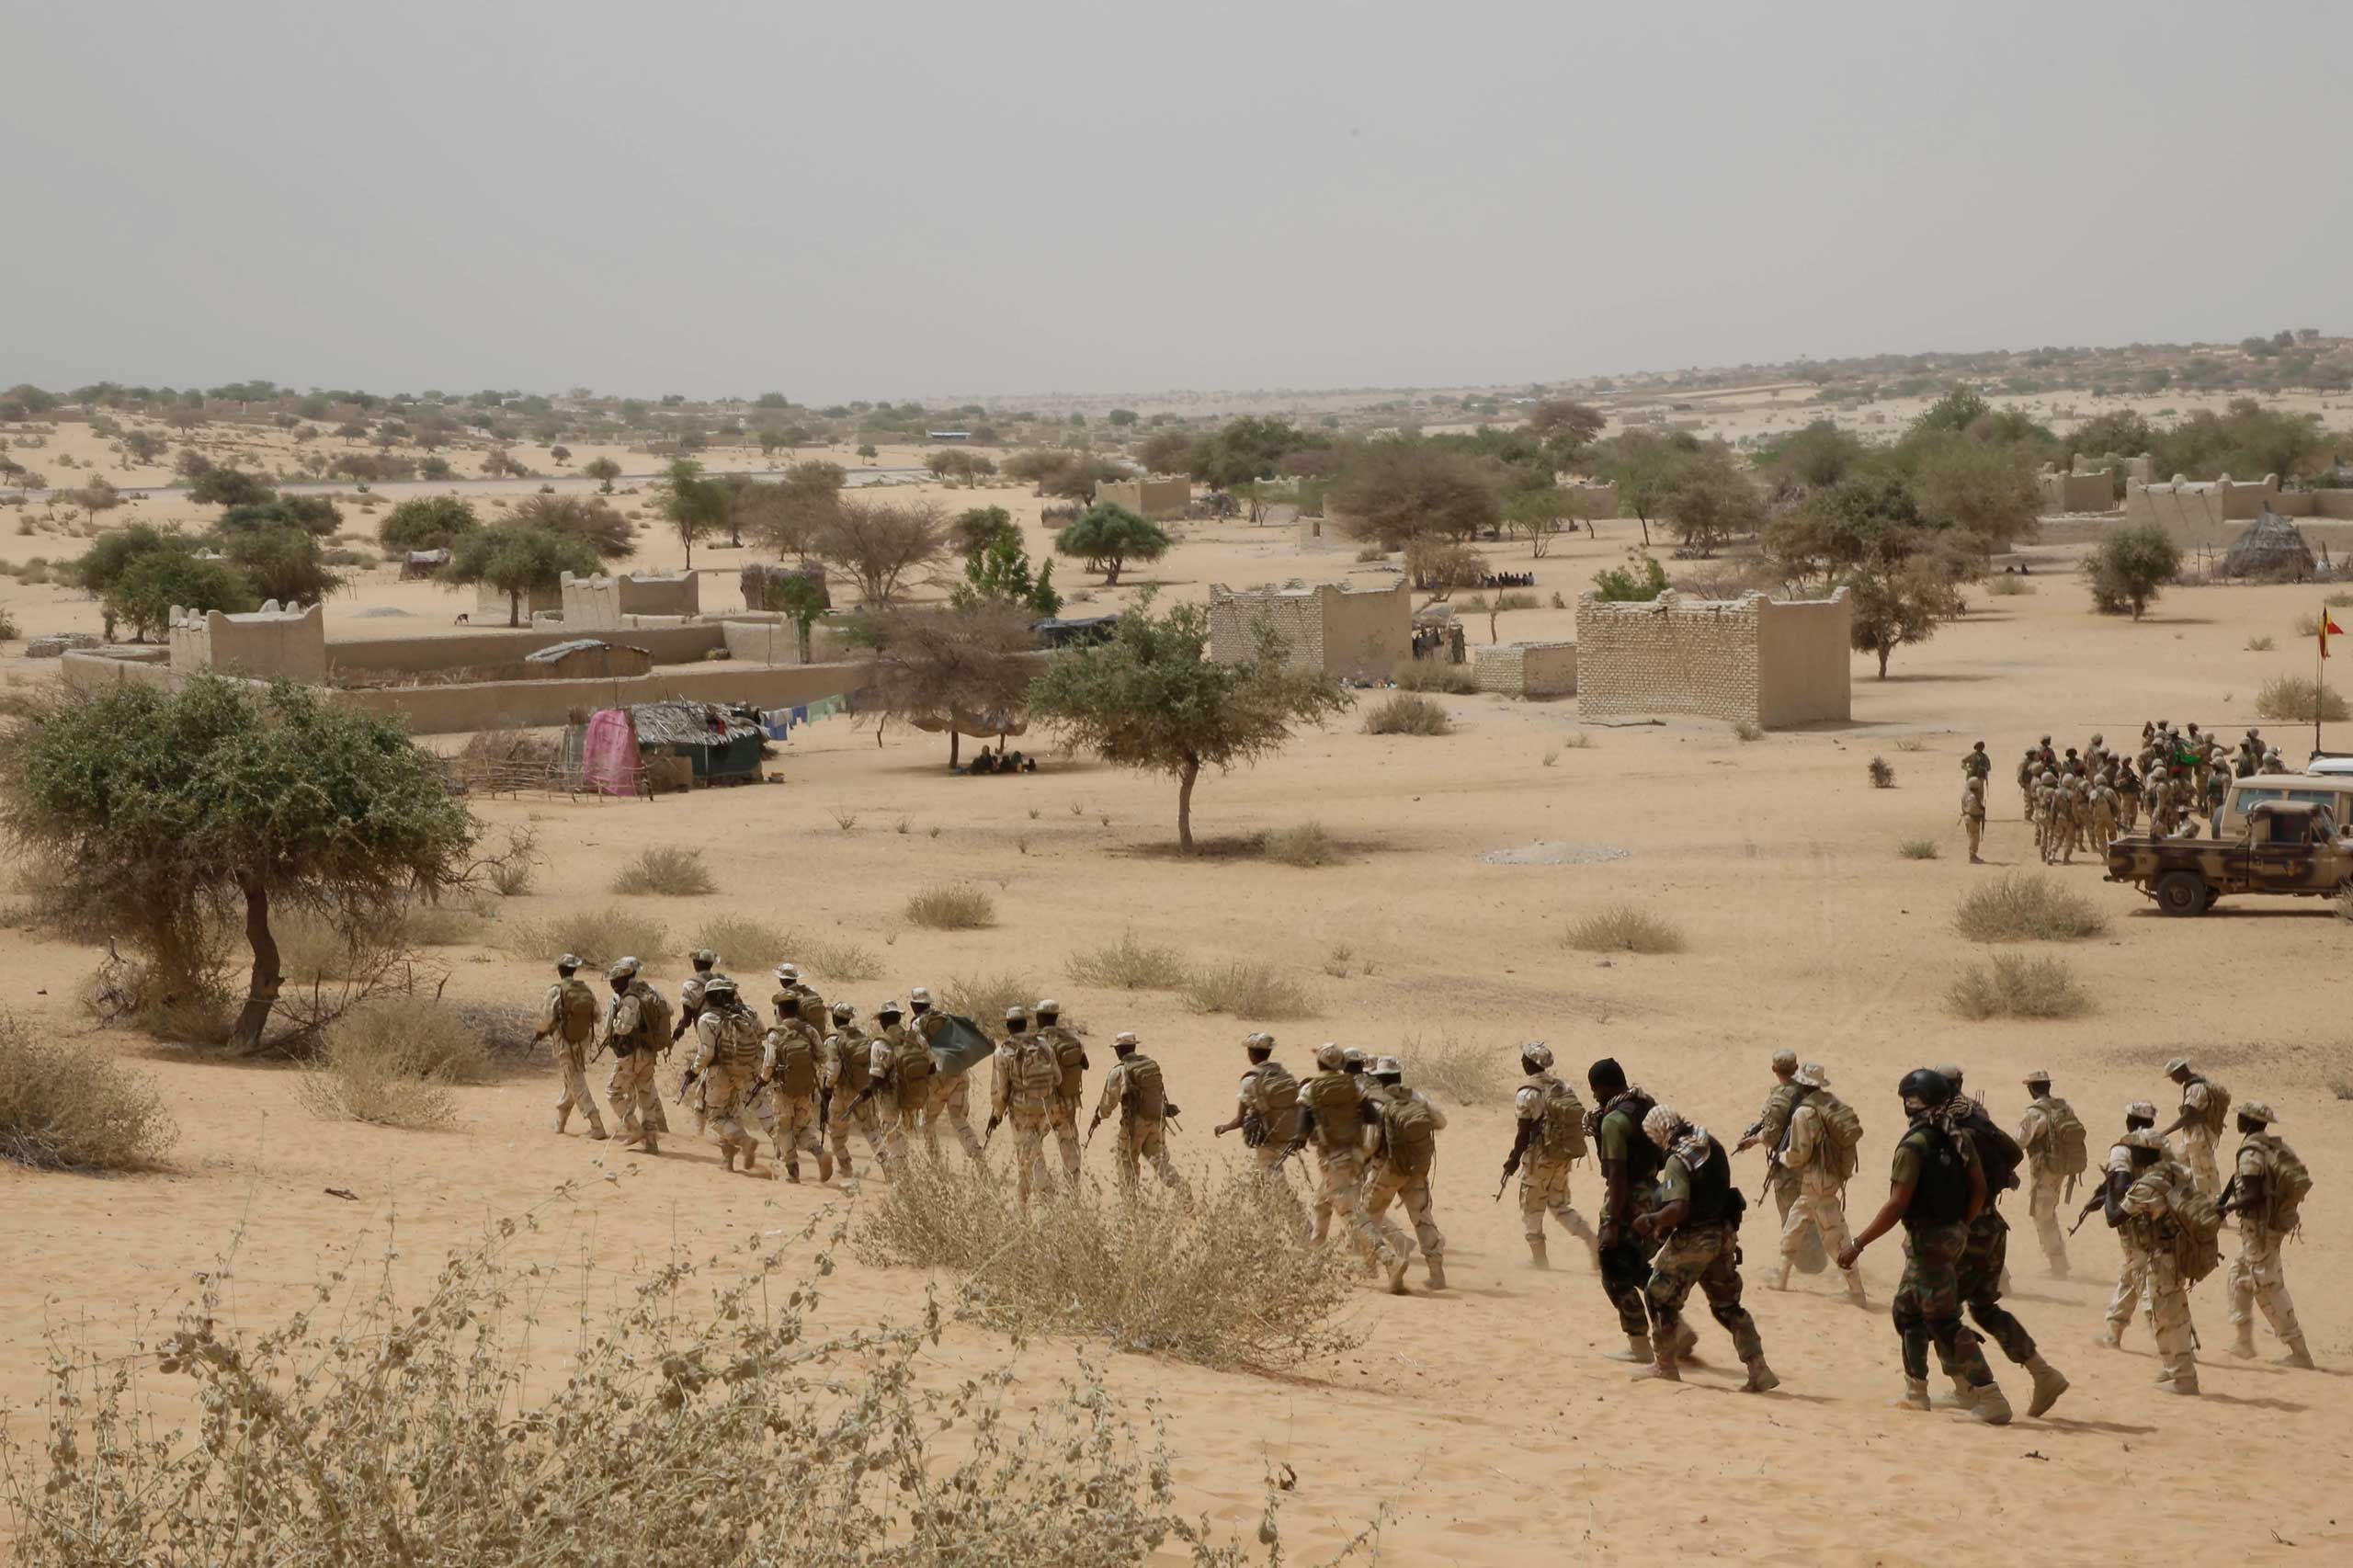 Chadian troops participate along with Nigerian special forces in an exercise in Mao, Chad on March 7, 2015. (Jerome Delay&amp;mdash;AP)